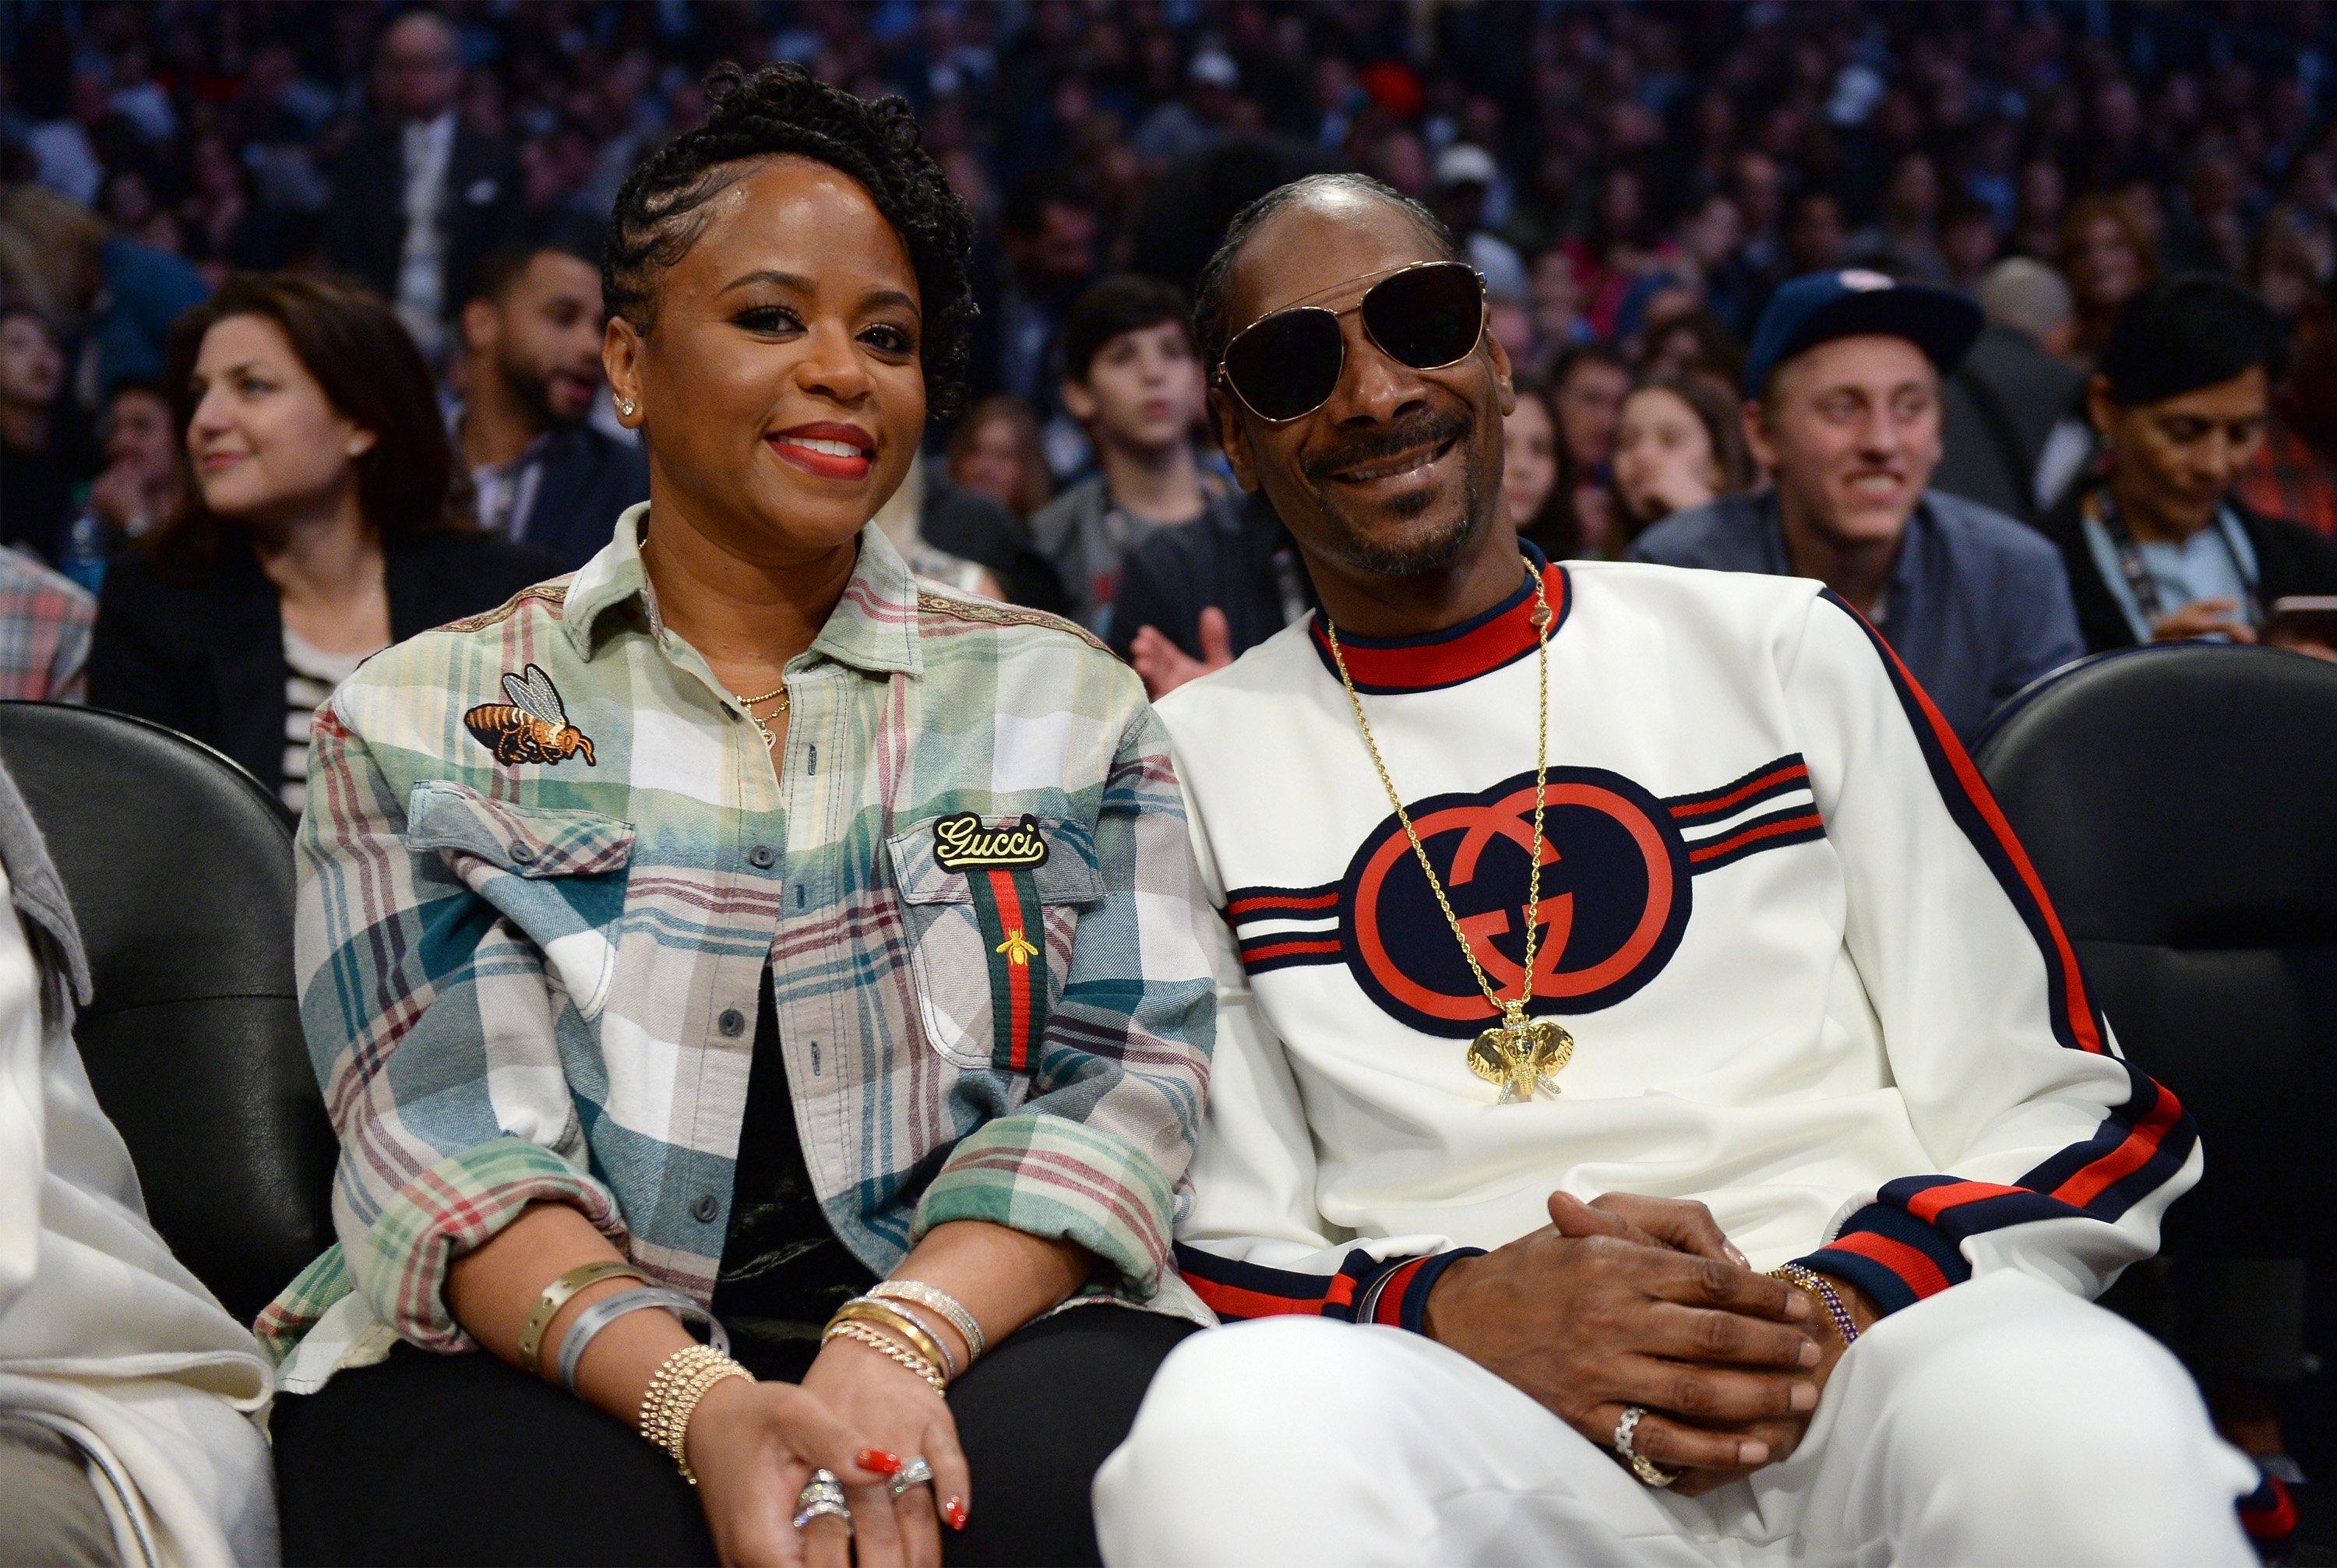 Snoop Dogg and wife Shante at the NBA All-Star Game on Feb. 18, 2018 in California | Photo: Getty Images